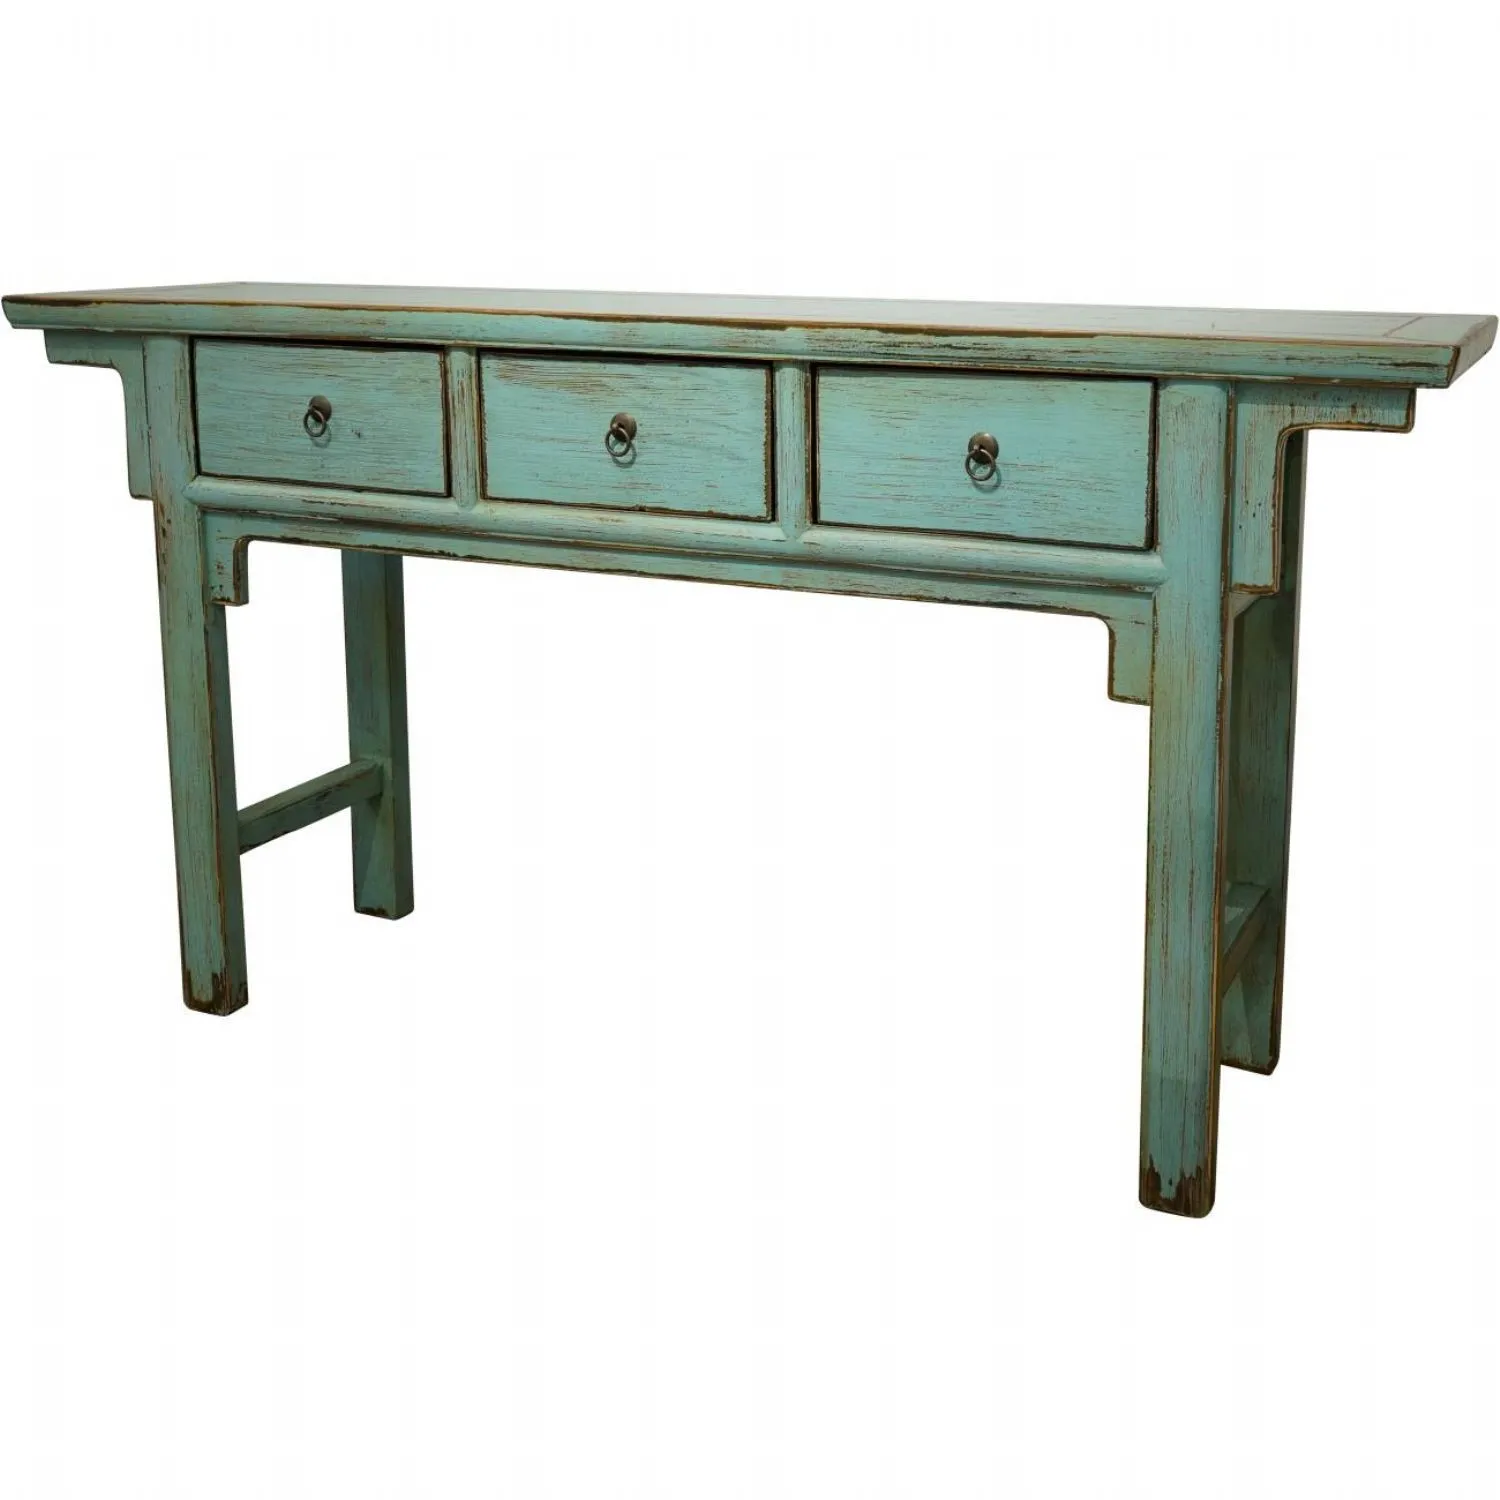 Green Painted Wooden Large Console Table with 3 Drawers